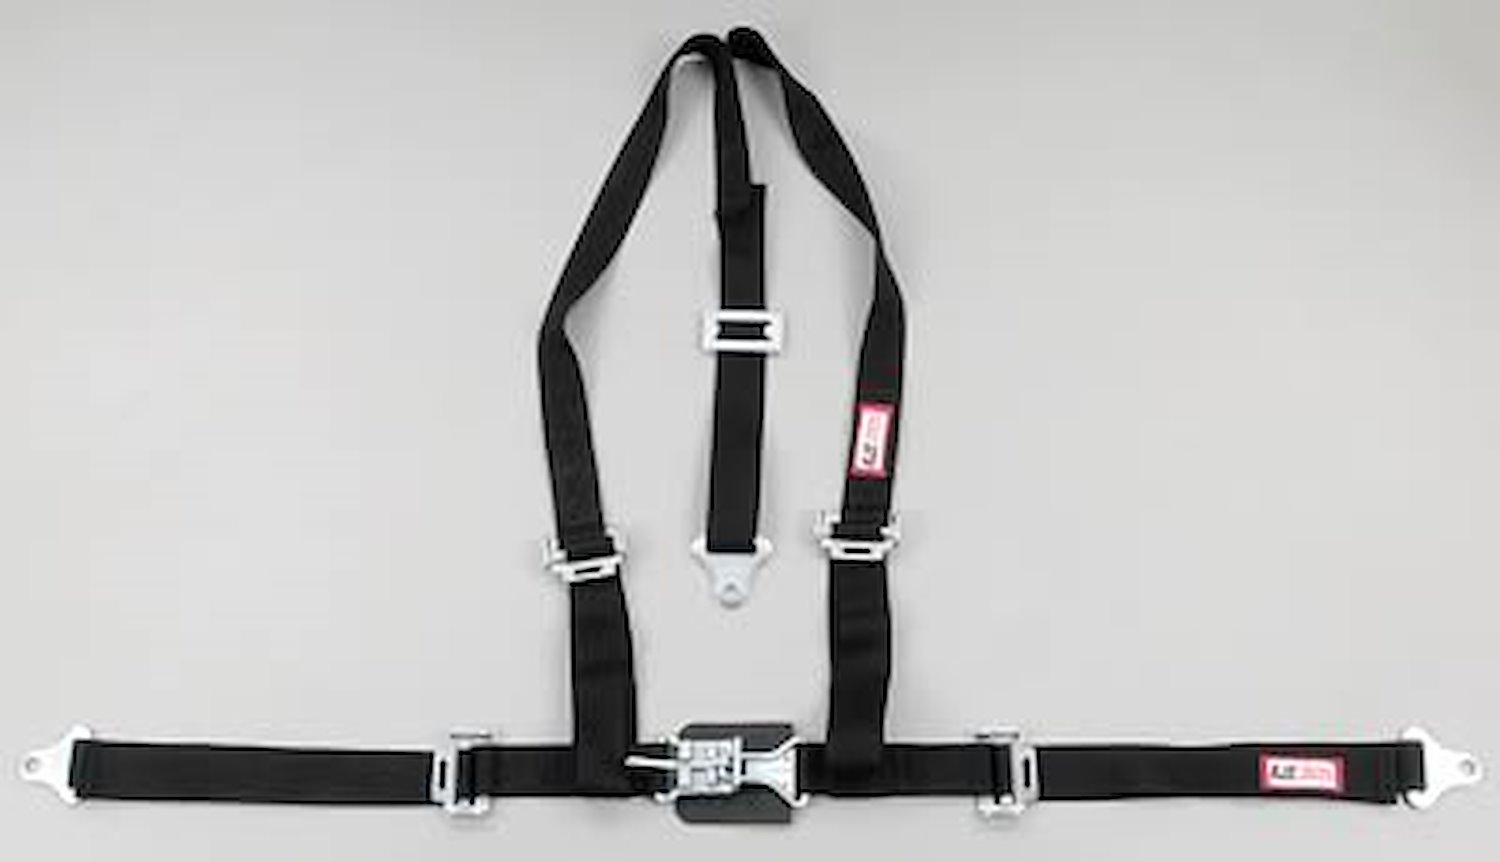 NON-SFI L&L HARNESS 2 PULL UP Lap Belt SNAP SEWN IN 2 S.H. Y FLOOR Mount WRAP/SNAP ORANGE